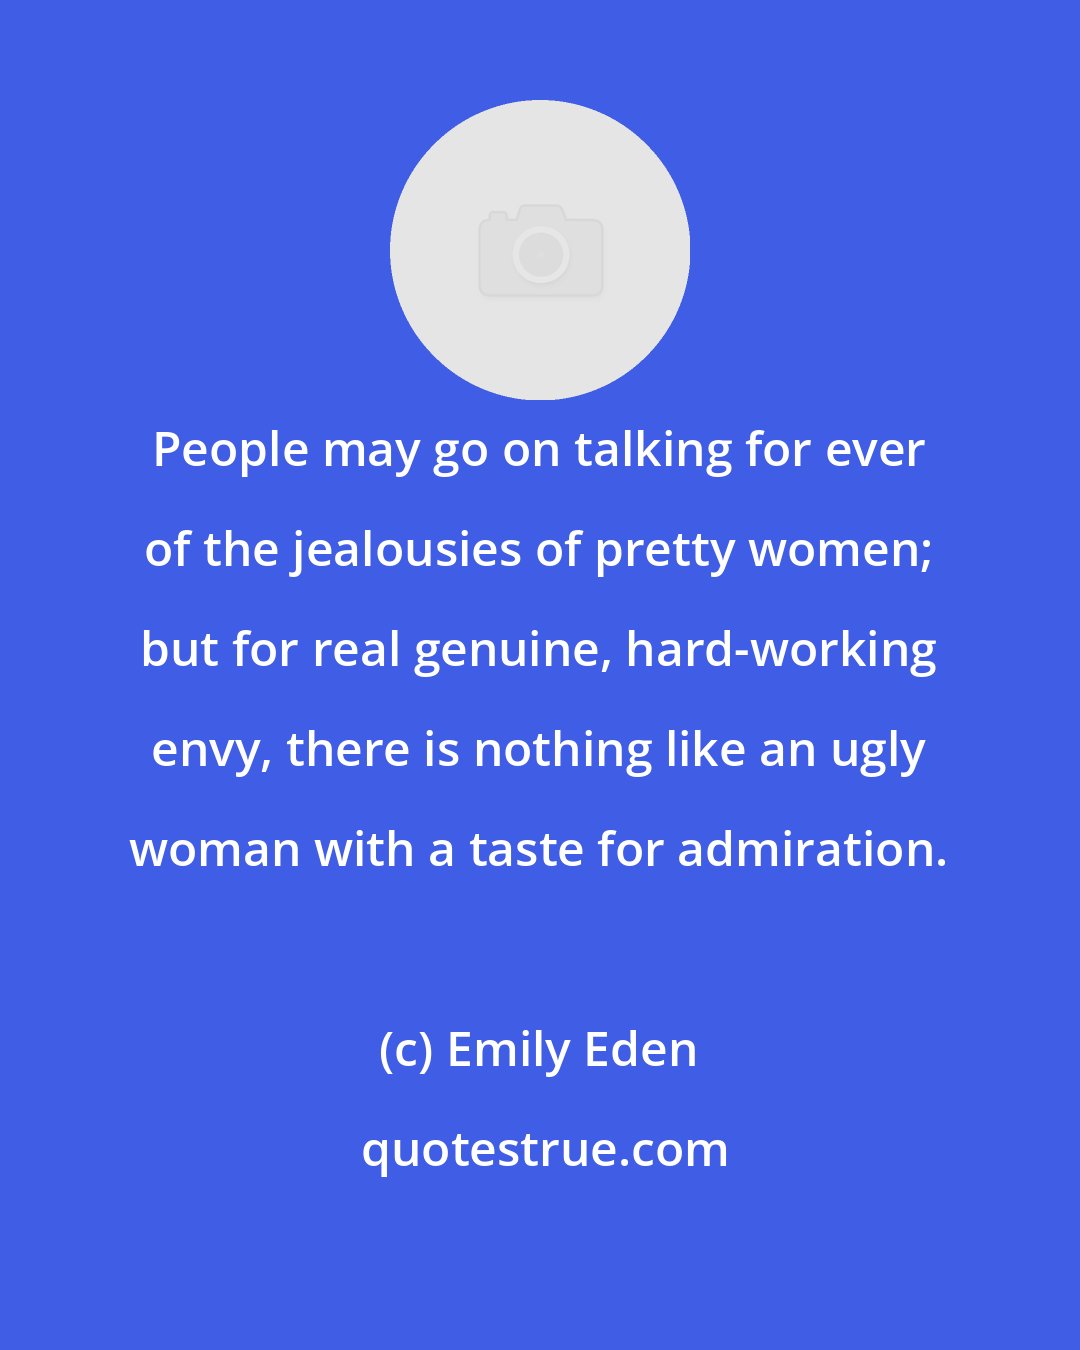 Emily Eden: People may go on talking for ever of the jealousies of pretty women; but for real genuine, hard-working envy, there is nothing like an ugly woman with a taste for admiration.